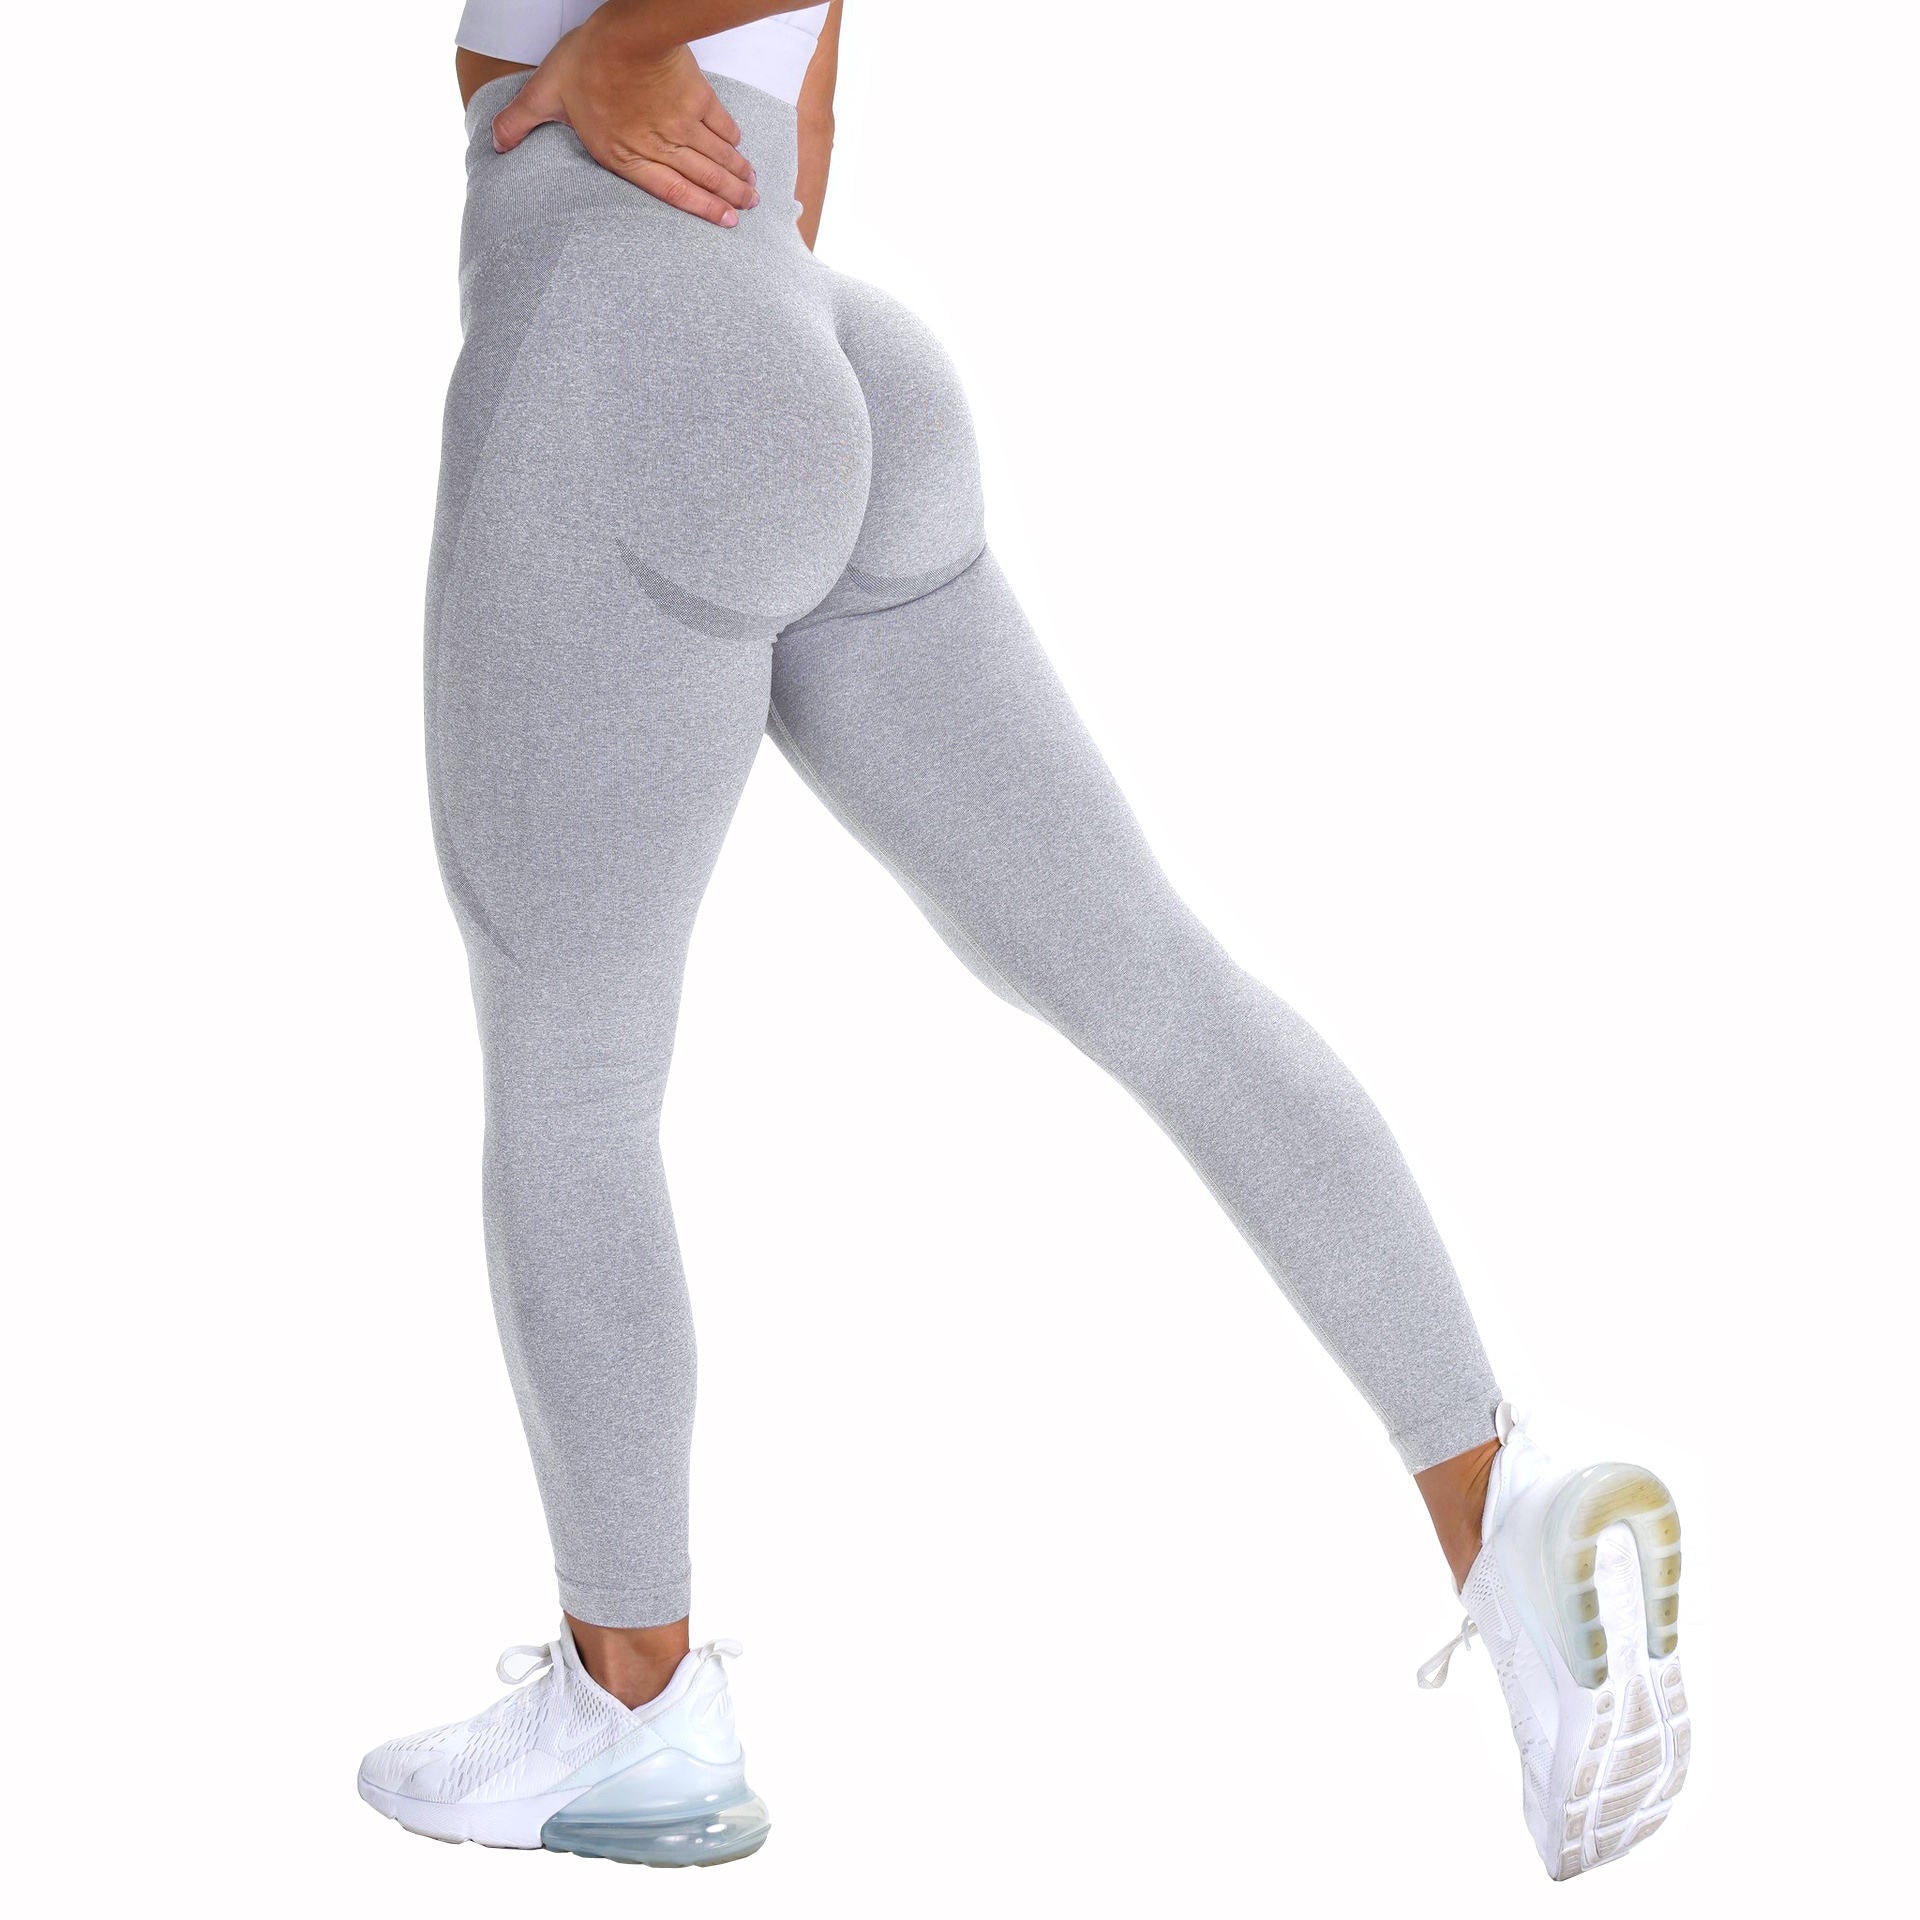 Buy Women's Yoga Pants with High Waist Tummy Control Workout